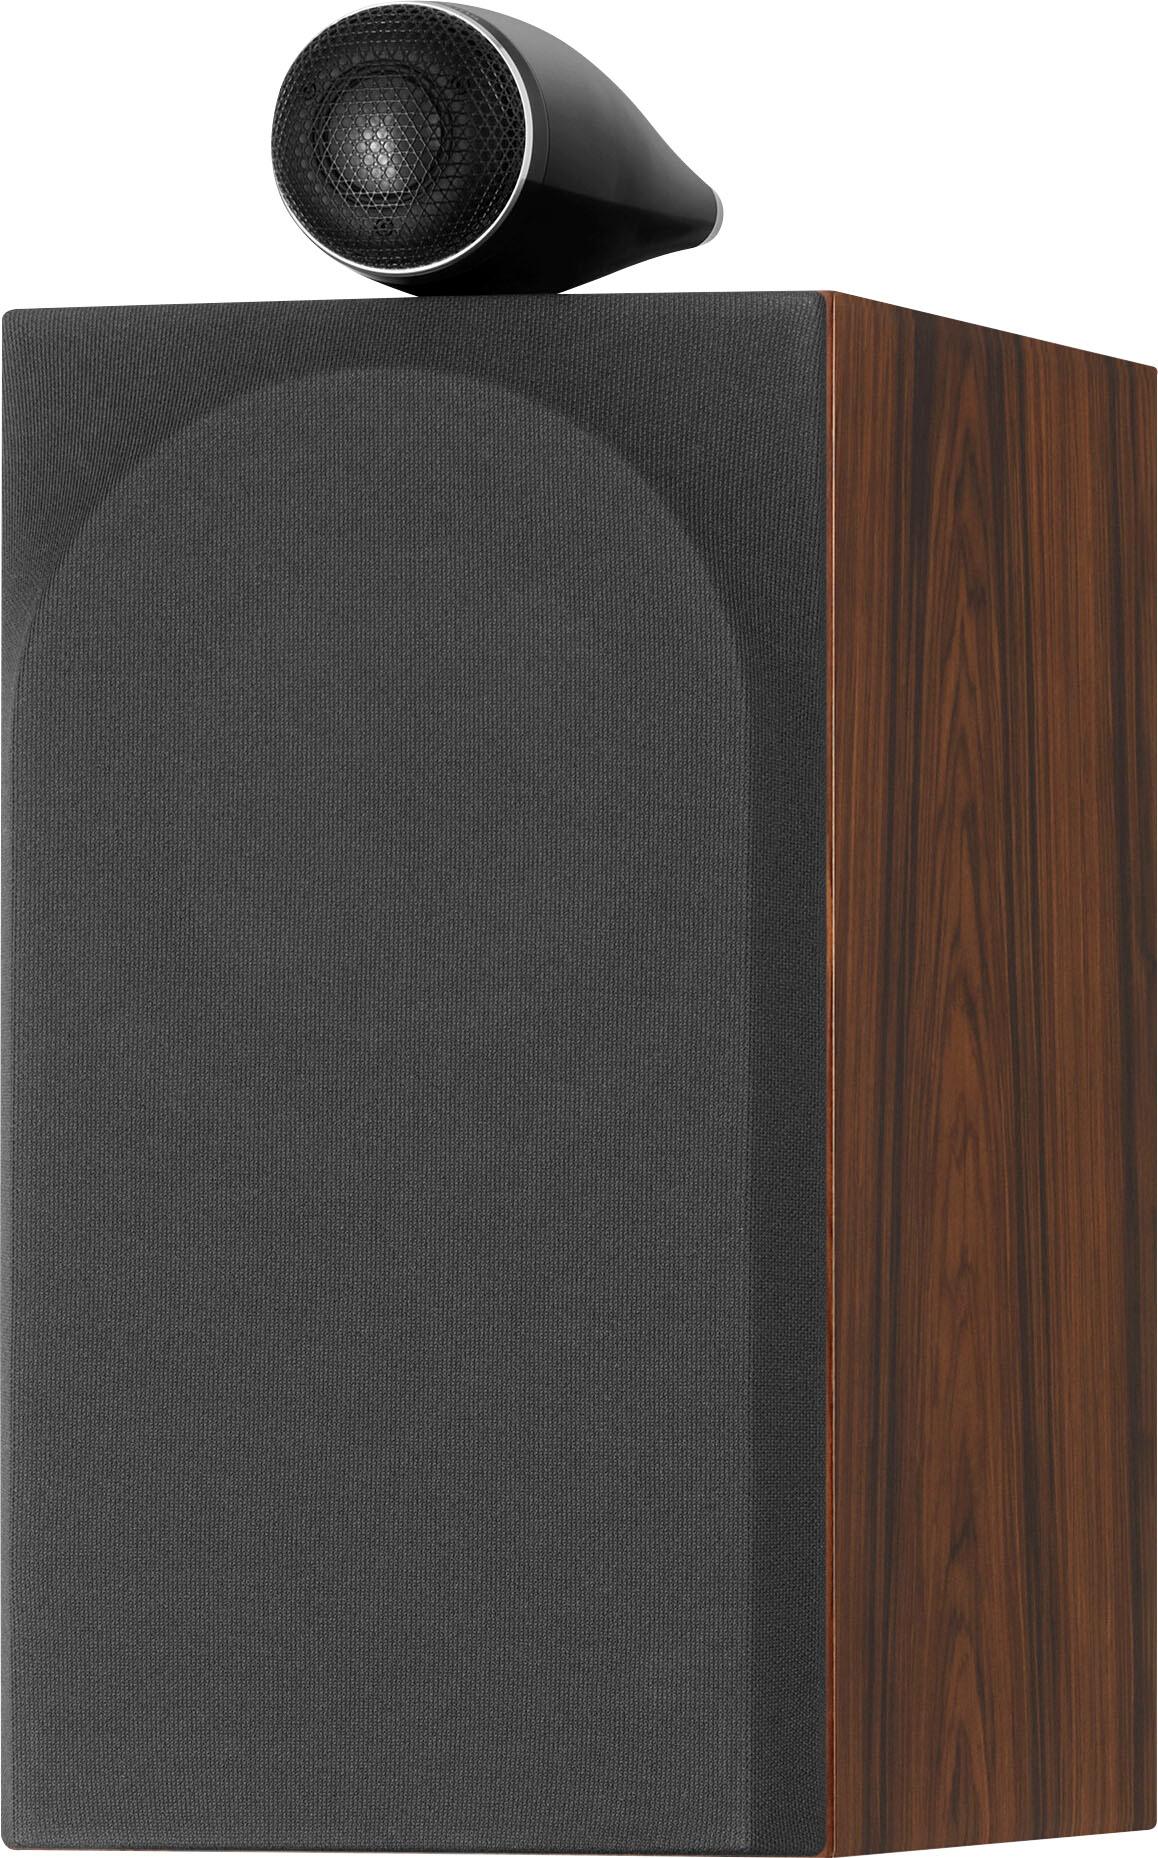 Angle View: Bowers & Wilkins - 700 Series 3 Bookshelf Speaker with 1" Tweeter on Top and 6.5" Midbass (Pair) - Mocha